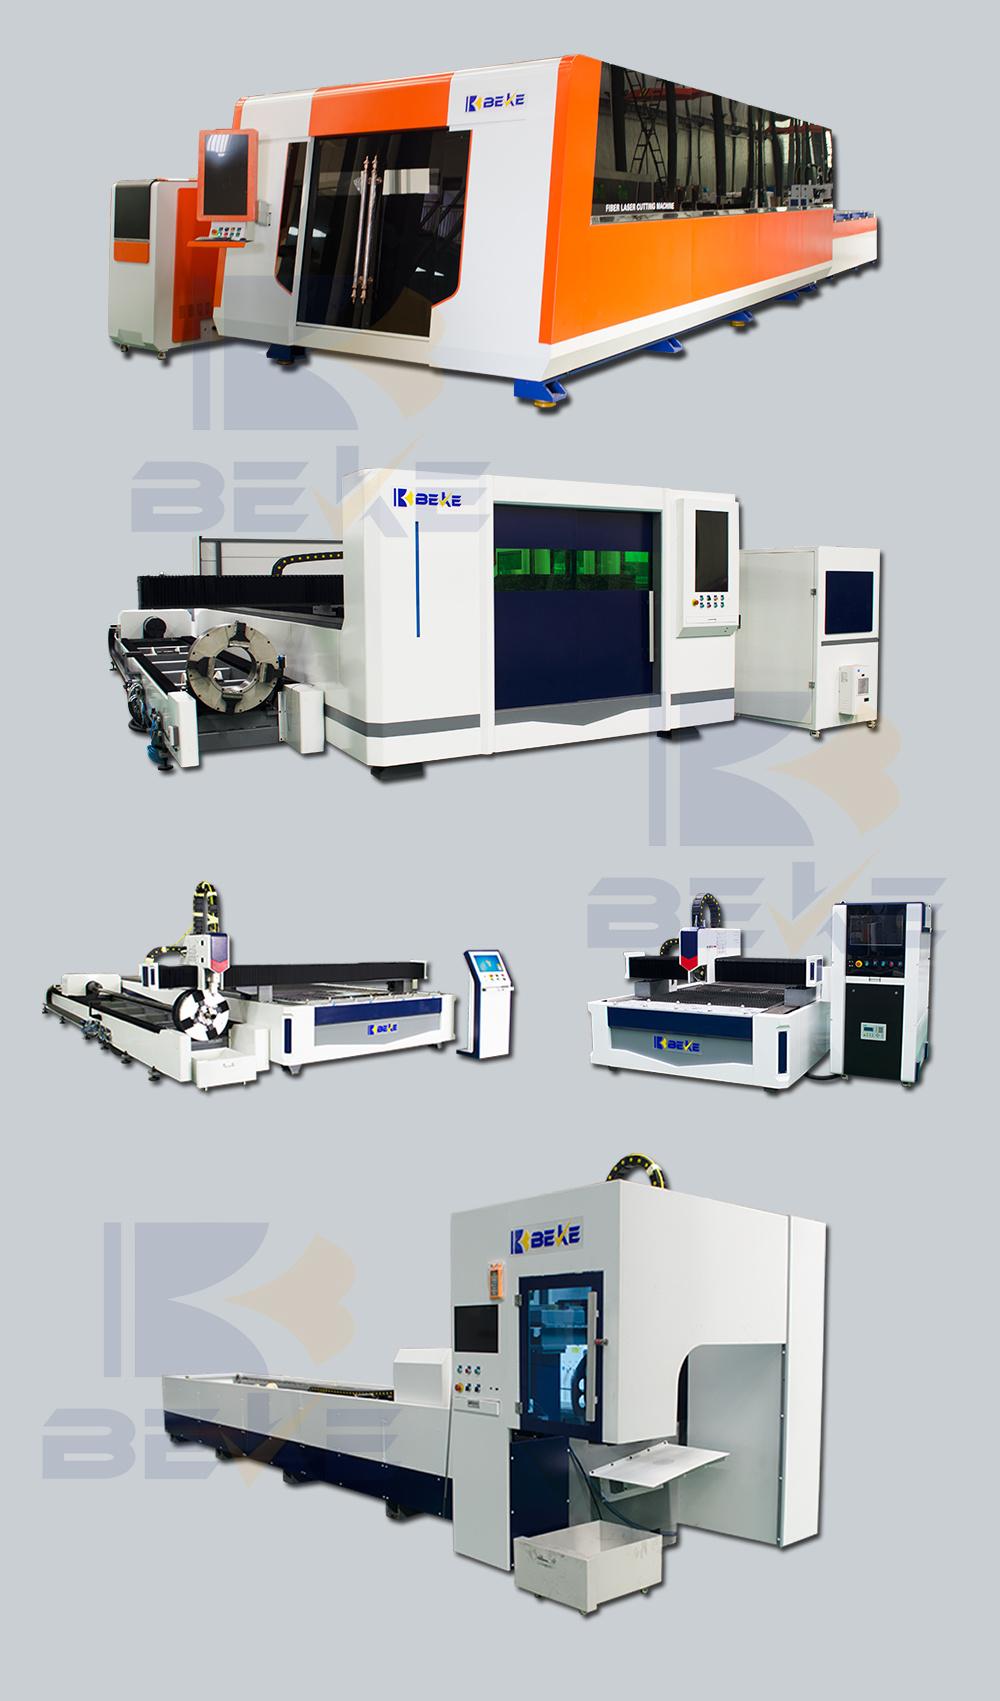 Beke High Performance 3015 Double Work Table Carbon Plate Fiber Laser Cutting Machine with CE